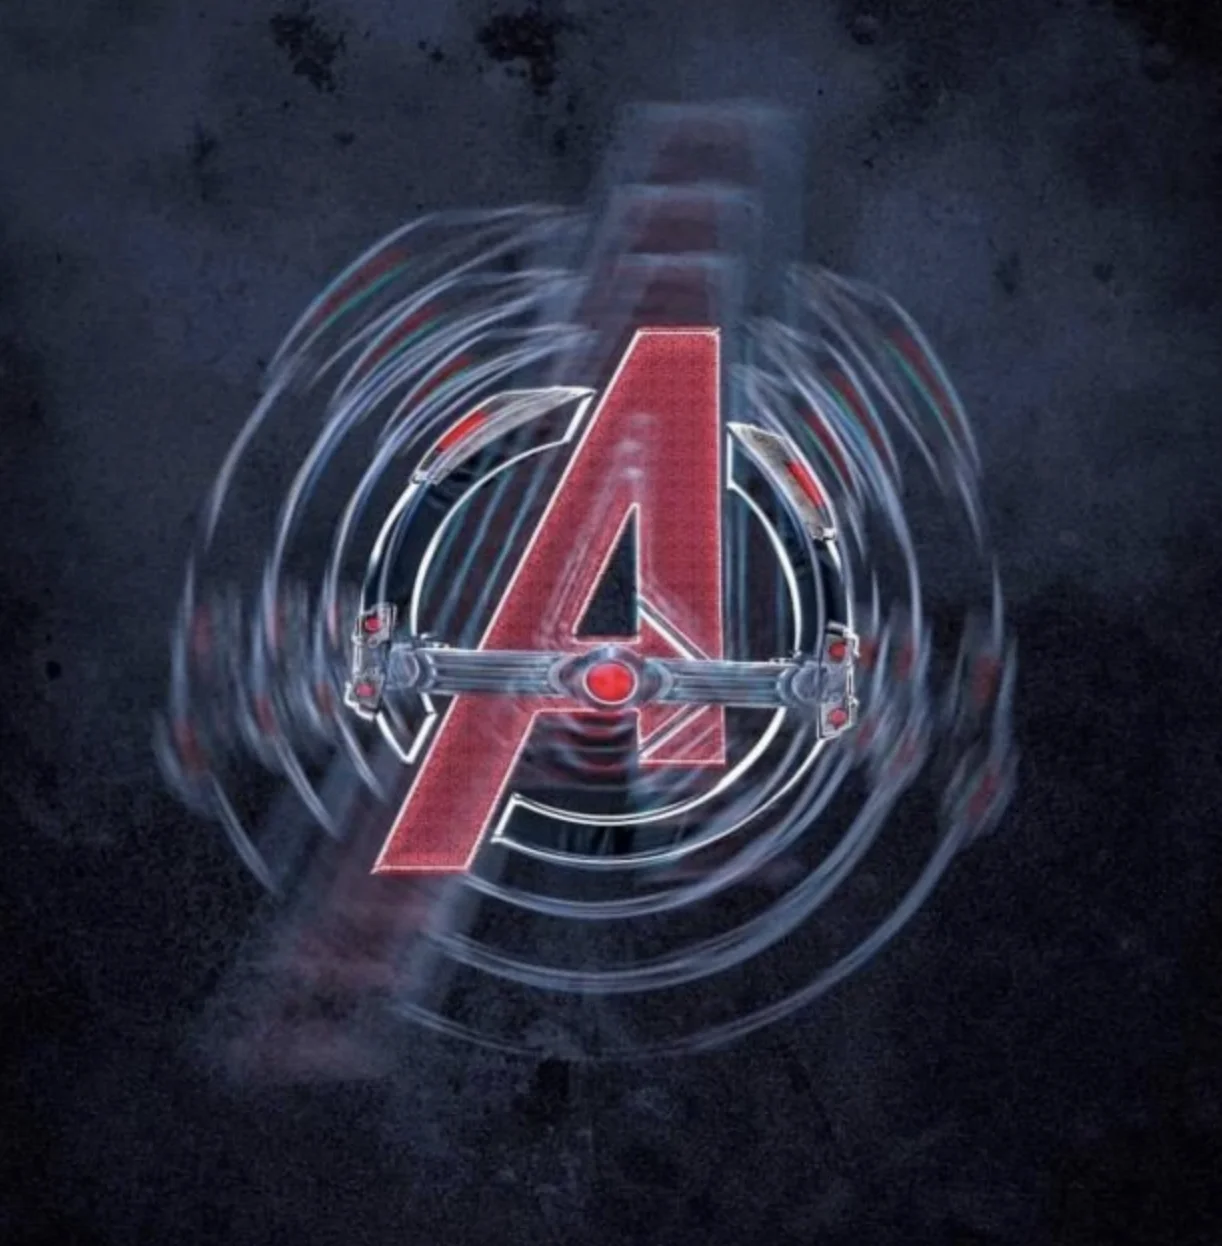 "Avengers: Endgame": Avengers logo with the personal characteristics of Marvel heroes